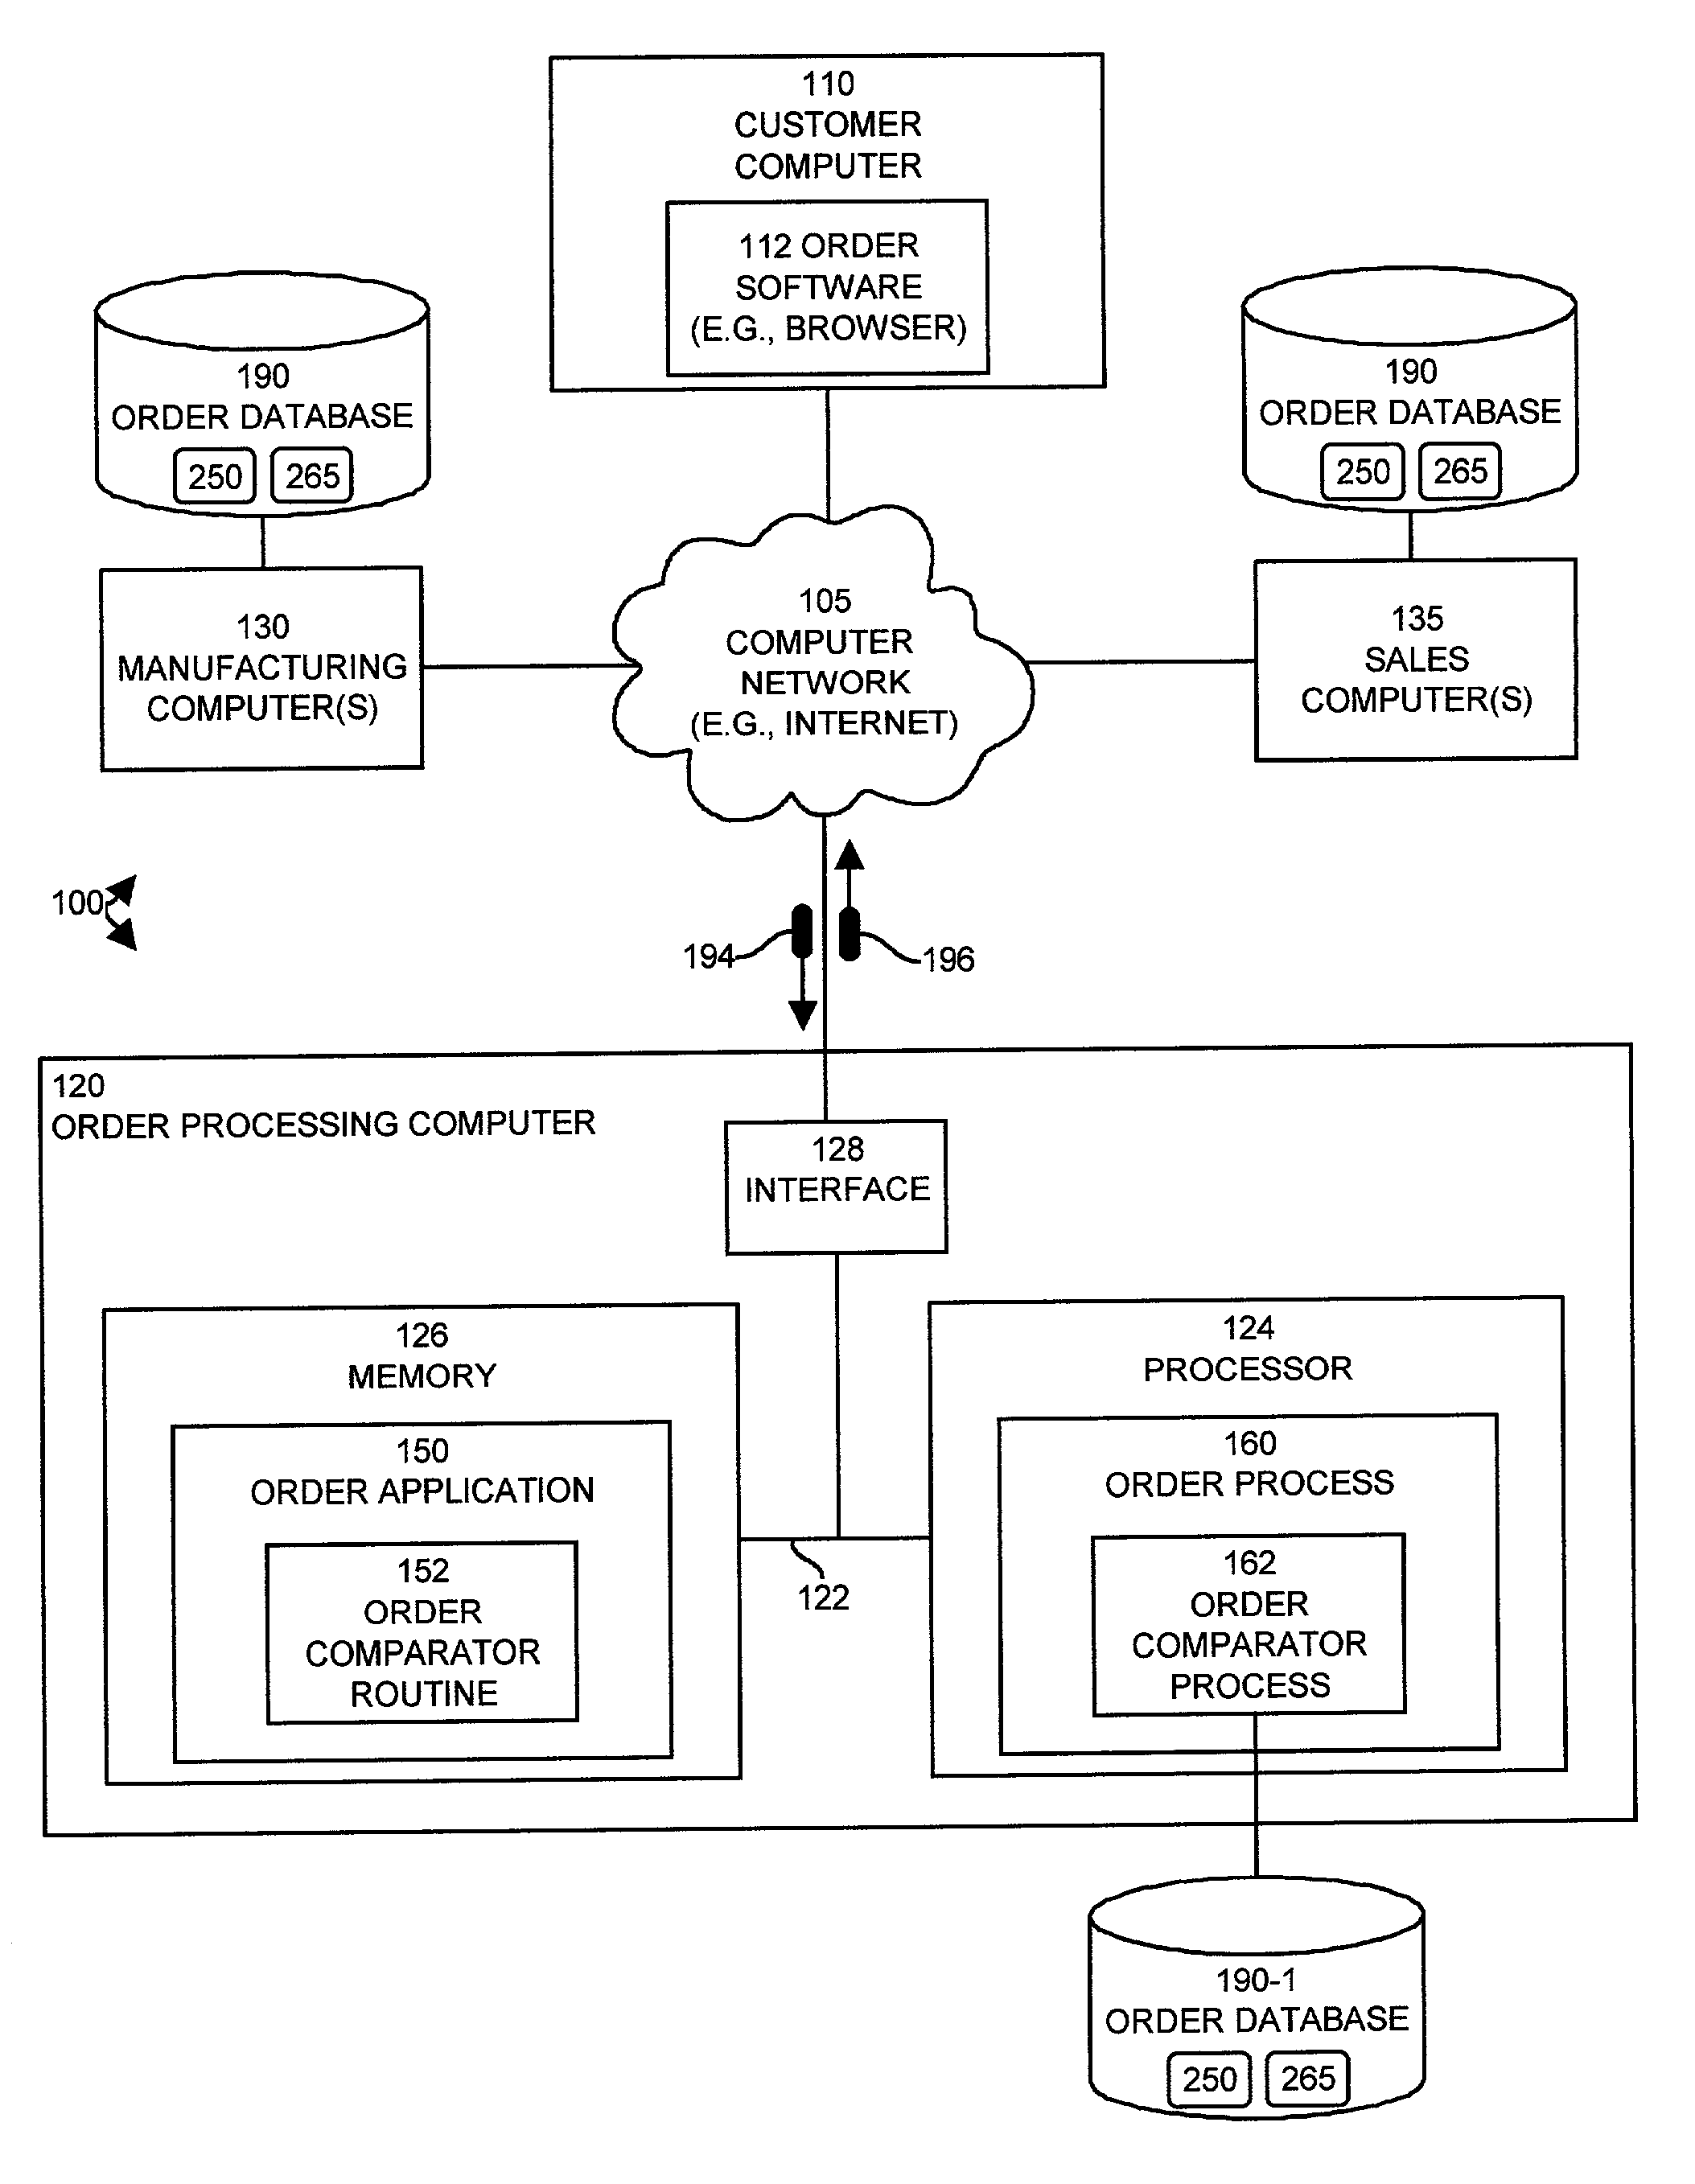 Methods and system for processing changes to existing purchase orders in an object-oriented order processing system